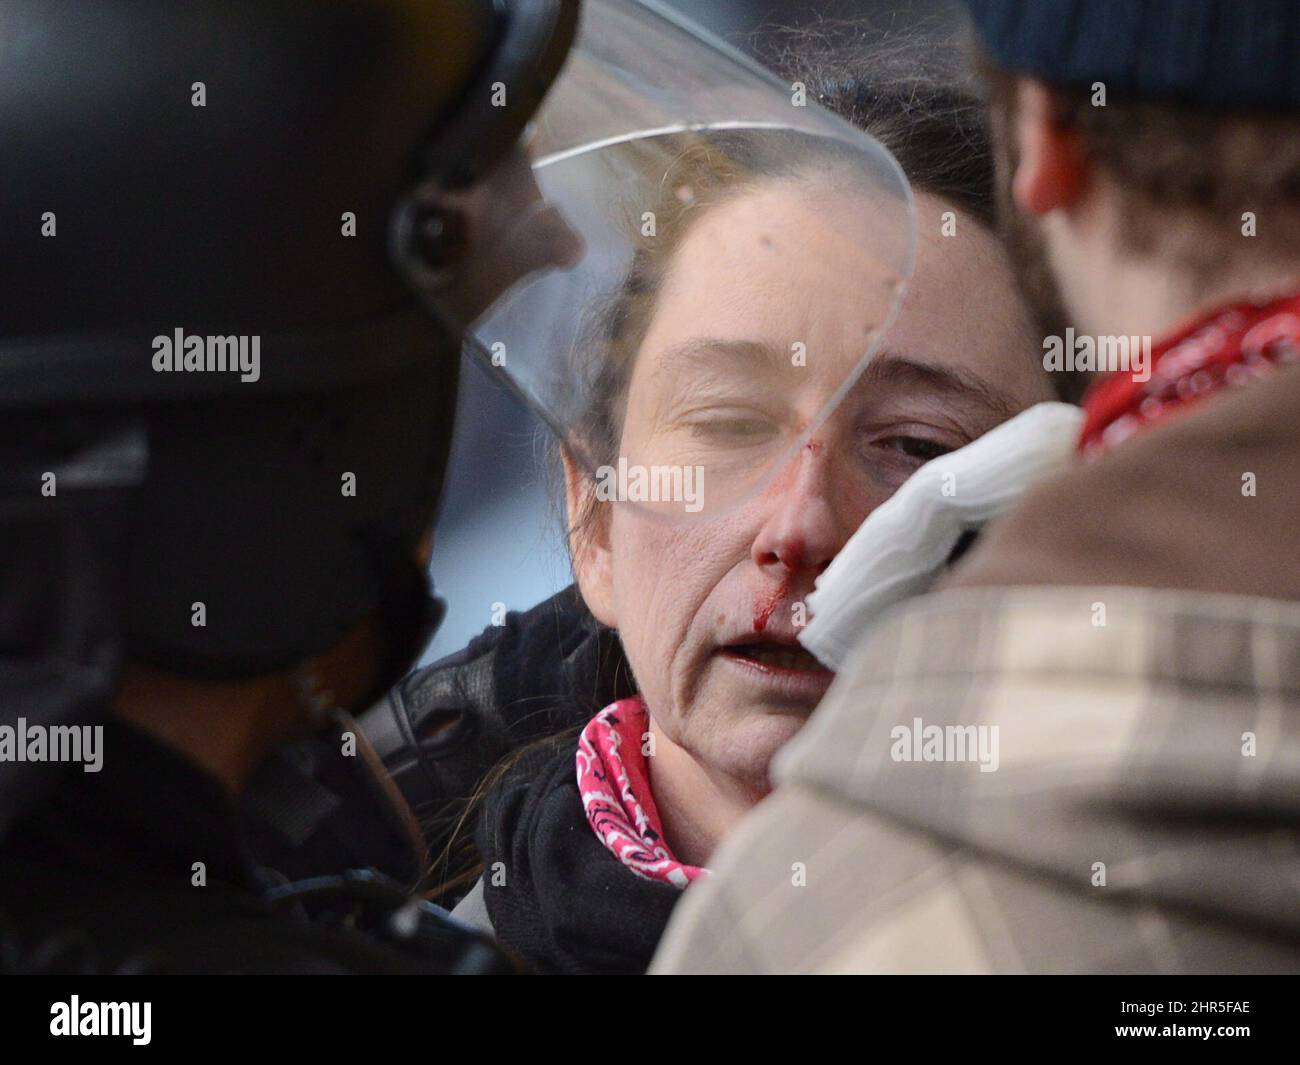 A woman is helped during an anti-police brutality demonstration in Montreal on Friday March 15, 2013. Police used horses, pepper-spray and kettling tactics to clamp down Friday on an annual protest that has a history of getting rowdy.THE CANADIAN PRESS/Ryan Remiorz Stock Photo